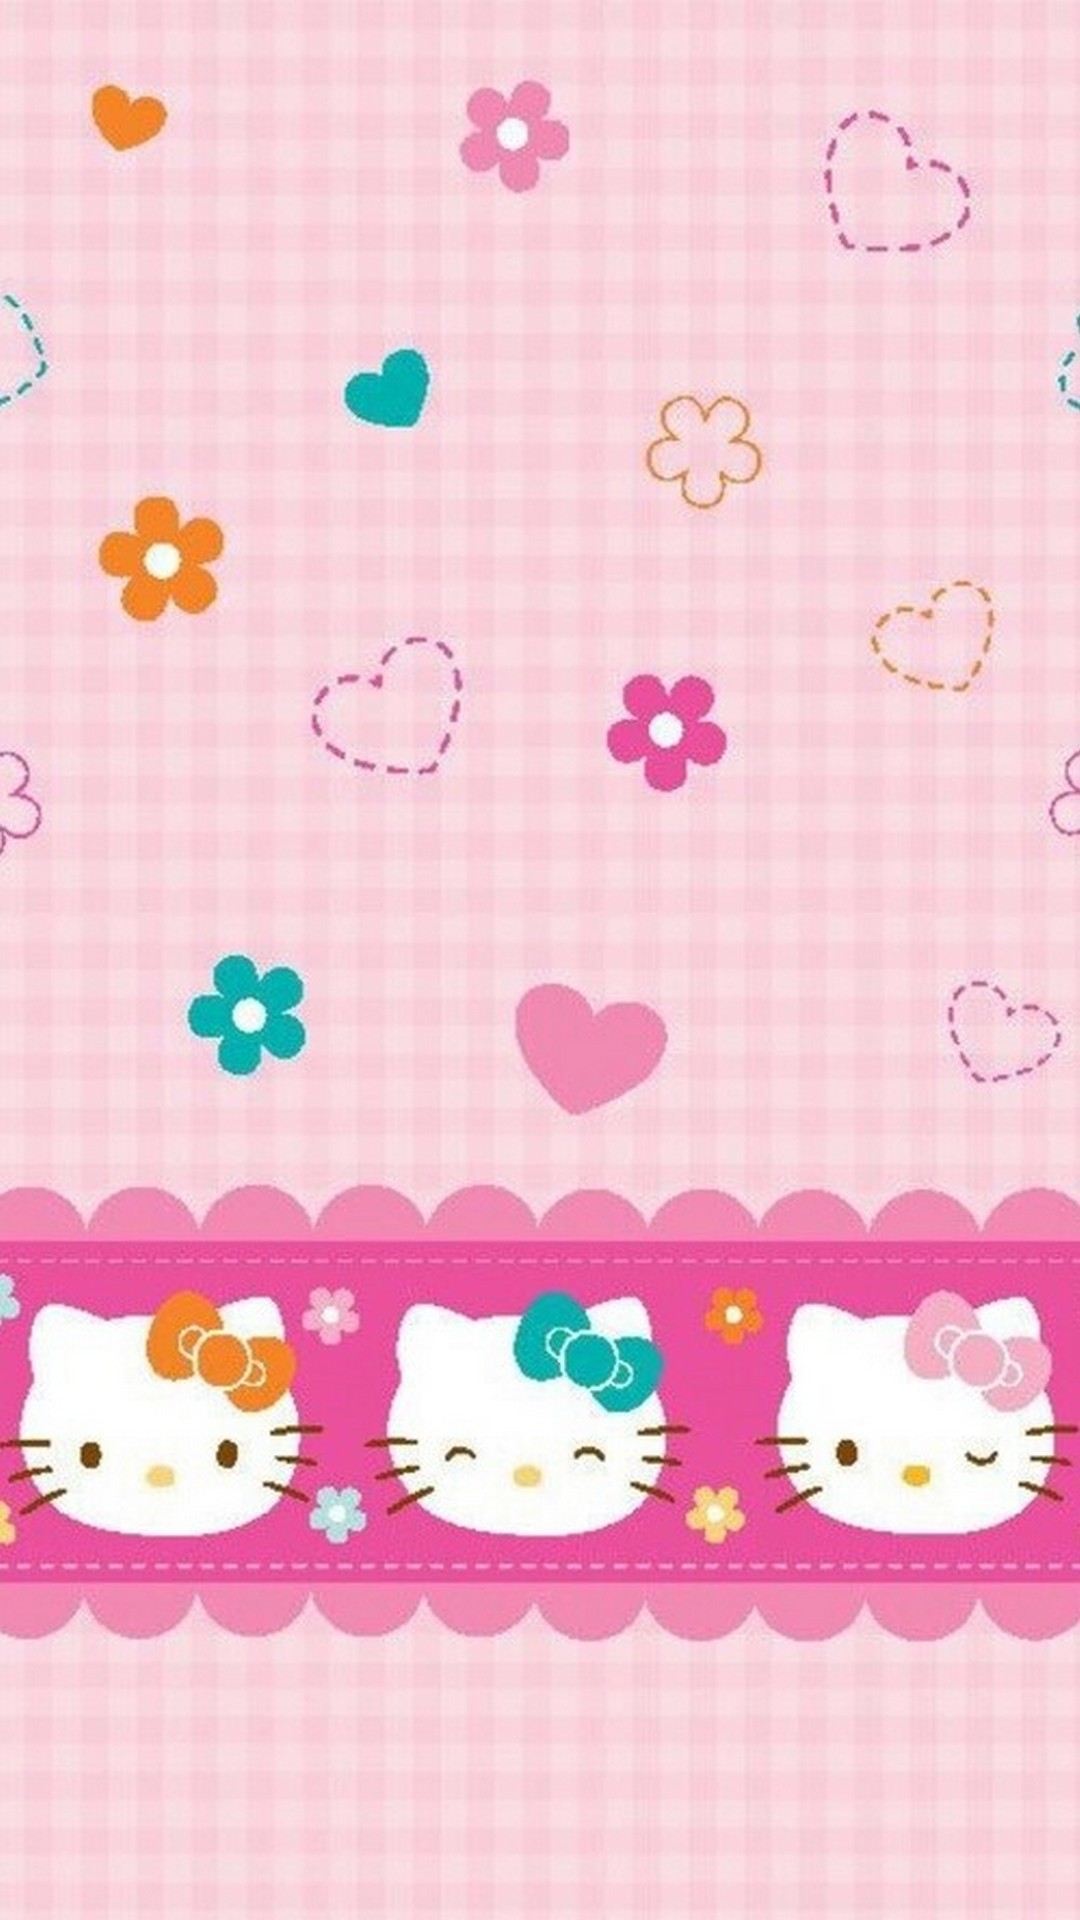 Wallpaper Android Hello Kitty Characters with image resolution 1080x1920 pixel. You can make this wallpaper for your Android backgrounds, Tablet, Smartphones Screensavers and Mobile Phone Lock Screen